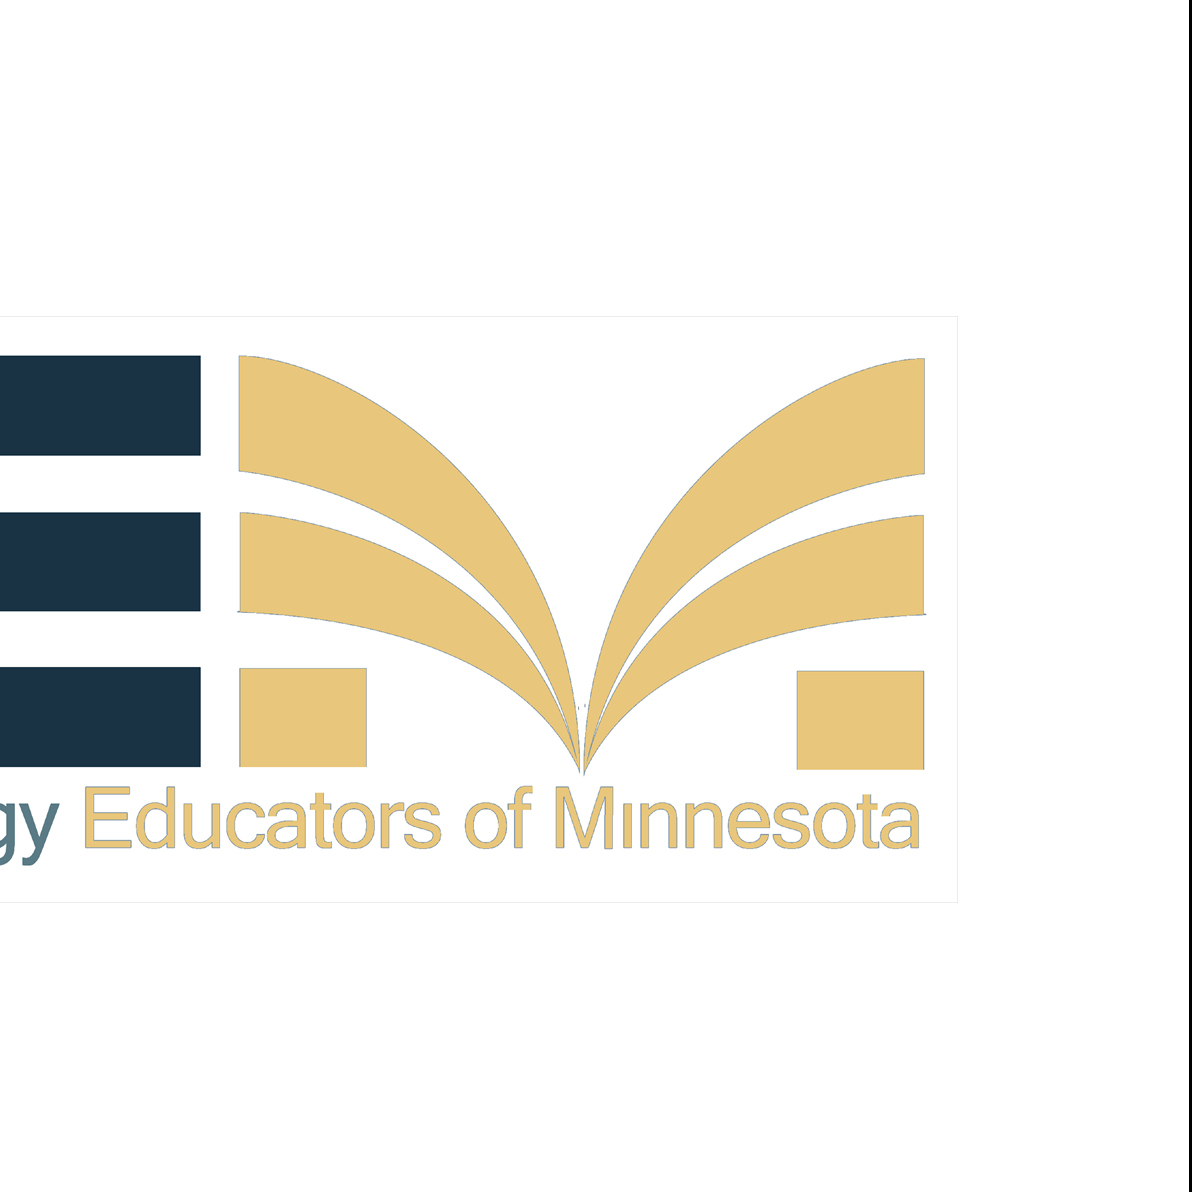 The blue and yellow wordmark for the Information and Technology Educators of Minnesota (ITEM).